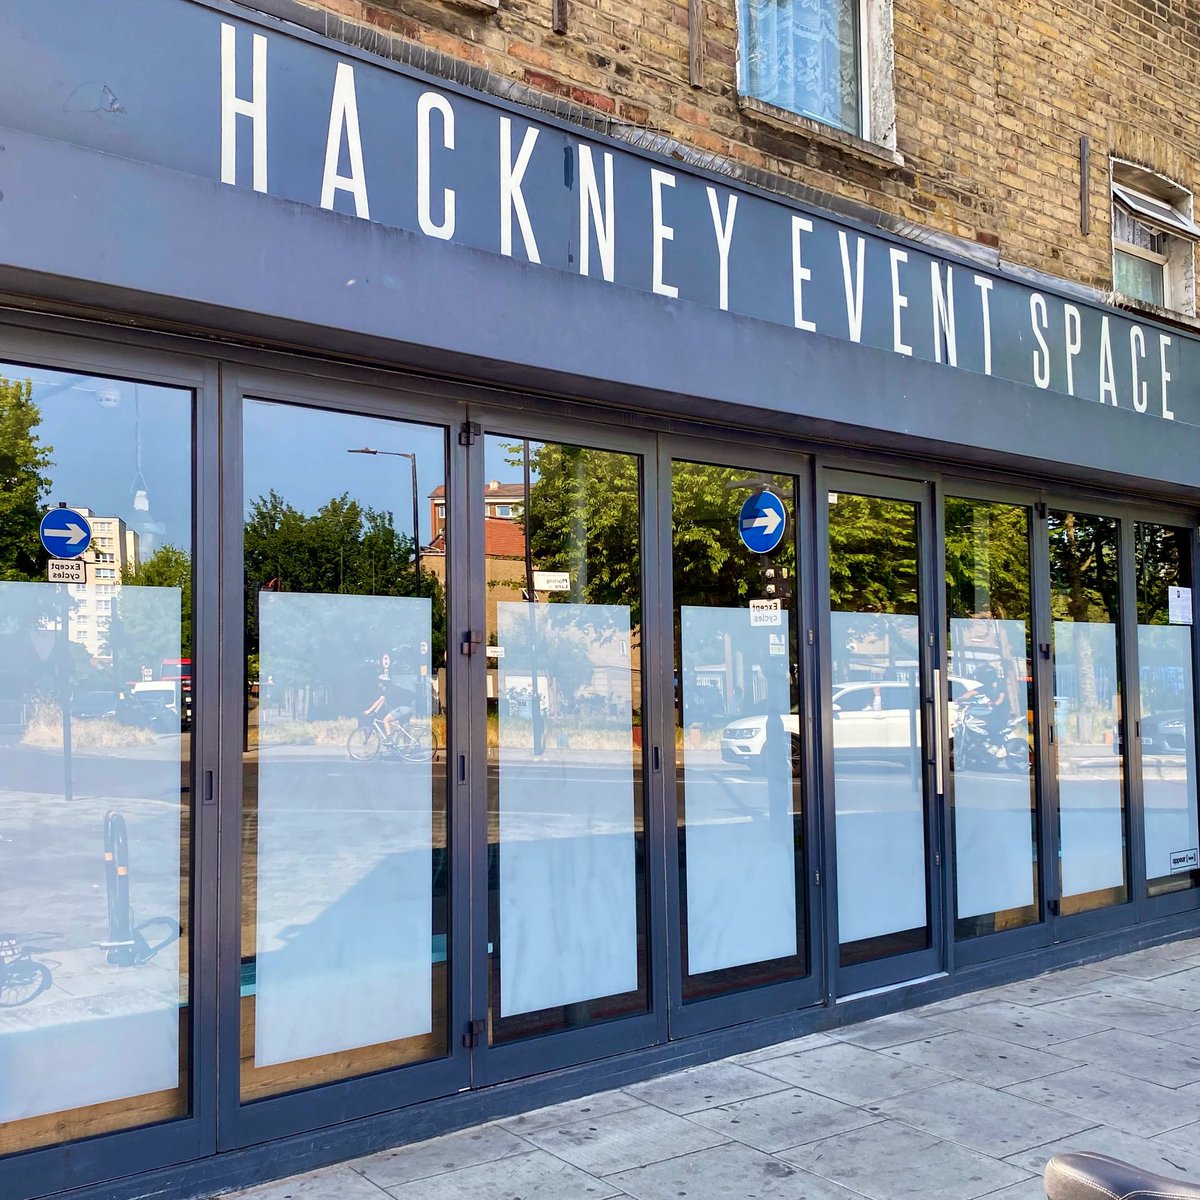 We’ve added frosting to our windows for extra privacy 👀 Saturdays in July are fully booked but we have some Friday availability so make an enquiry now for your private party ✌️via our website (link in bio)

#privateparty #partyvenue #eventspace #hackneyeventspace #hackney #e9